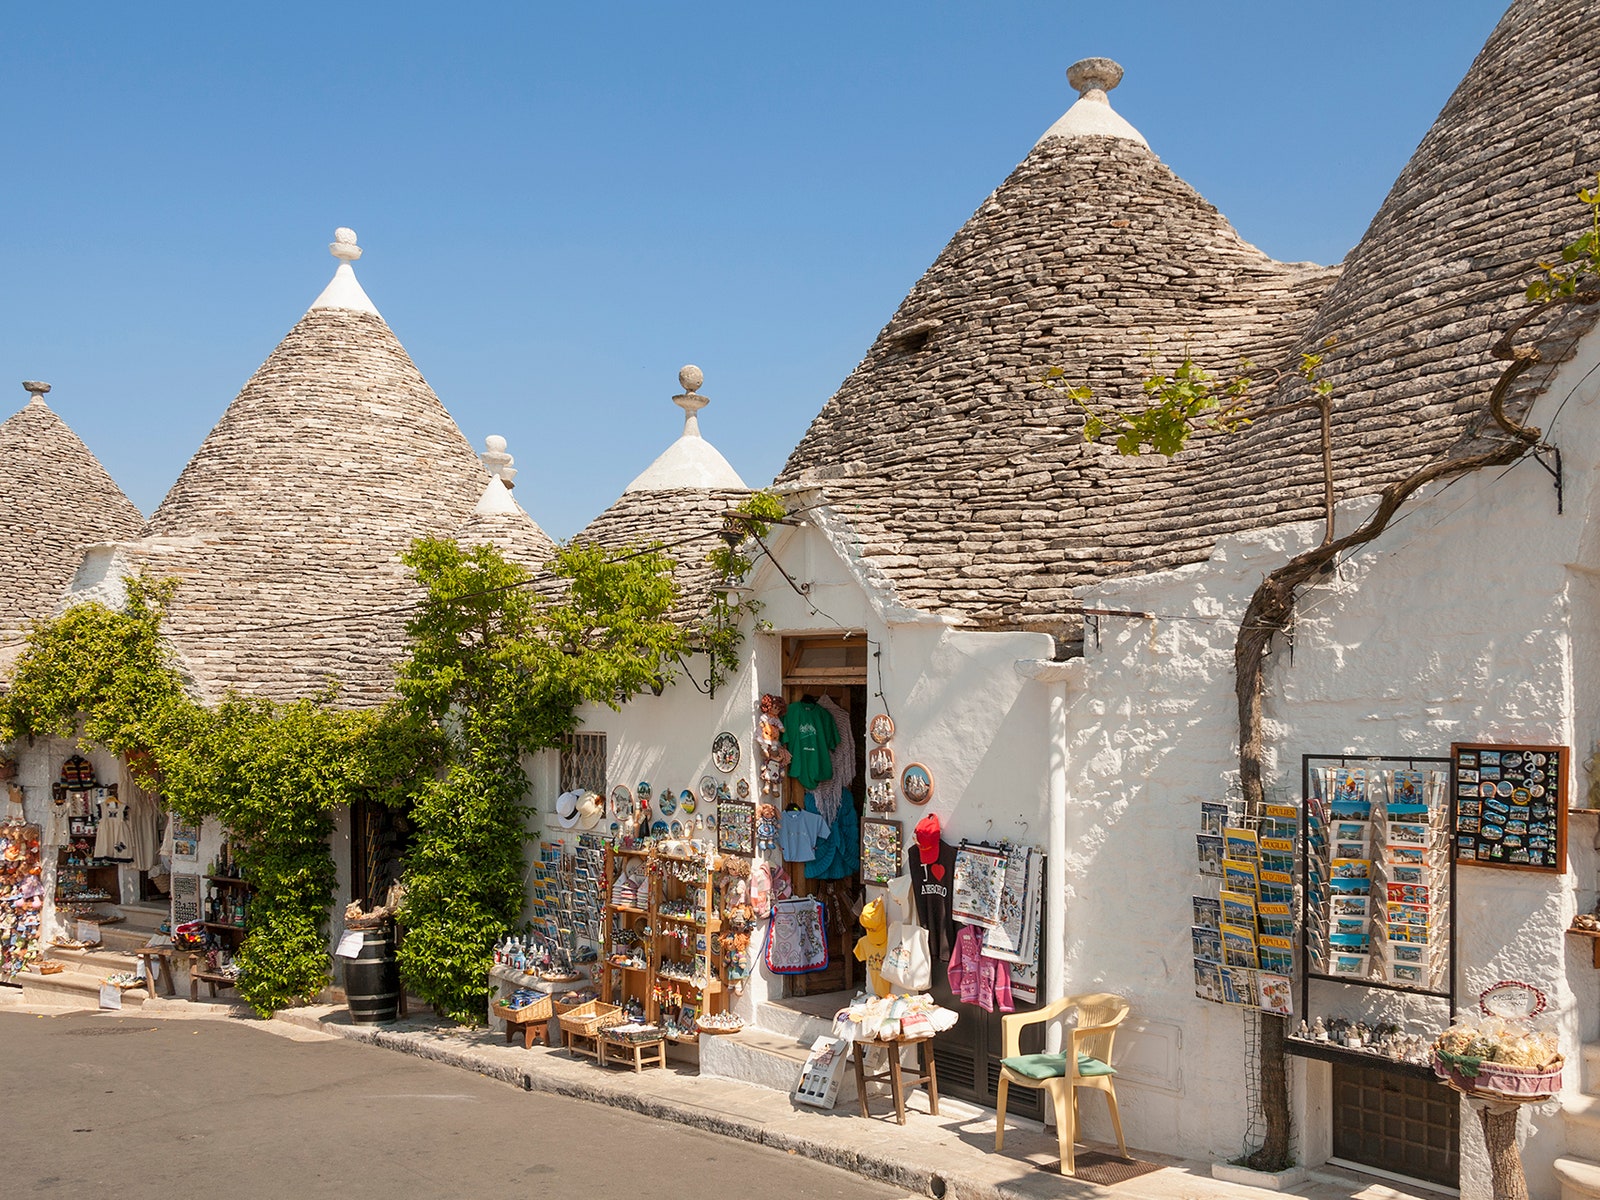 19 of the best hotels in Puglia for a chic Italian getaway